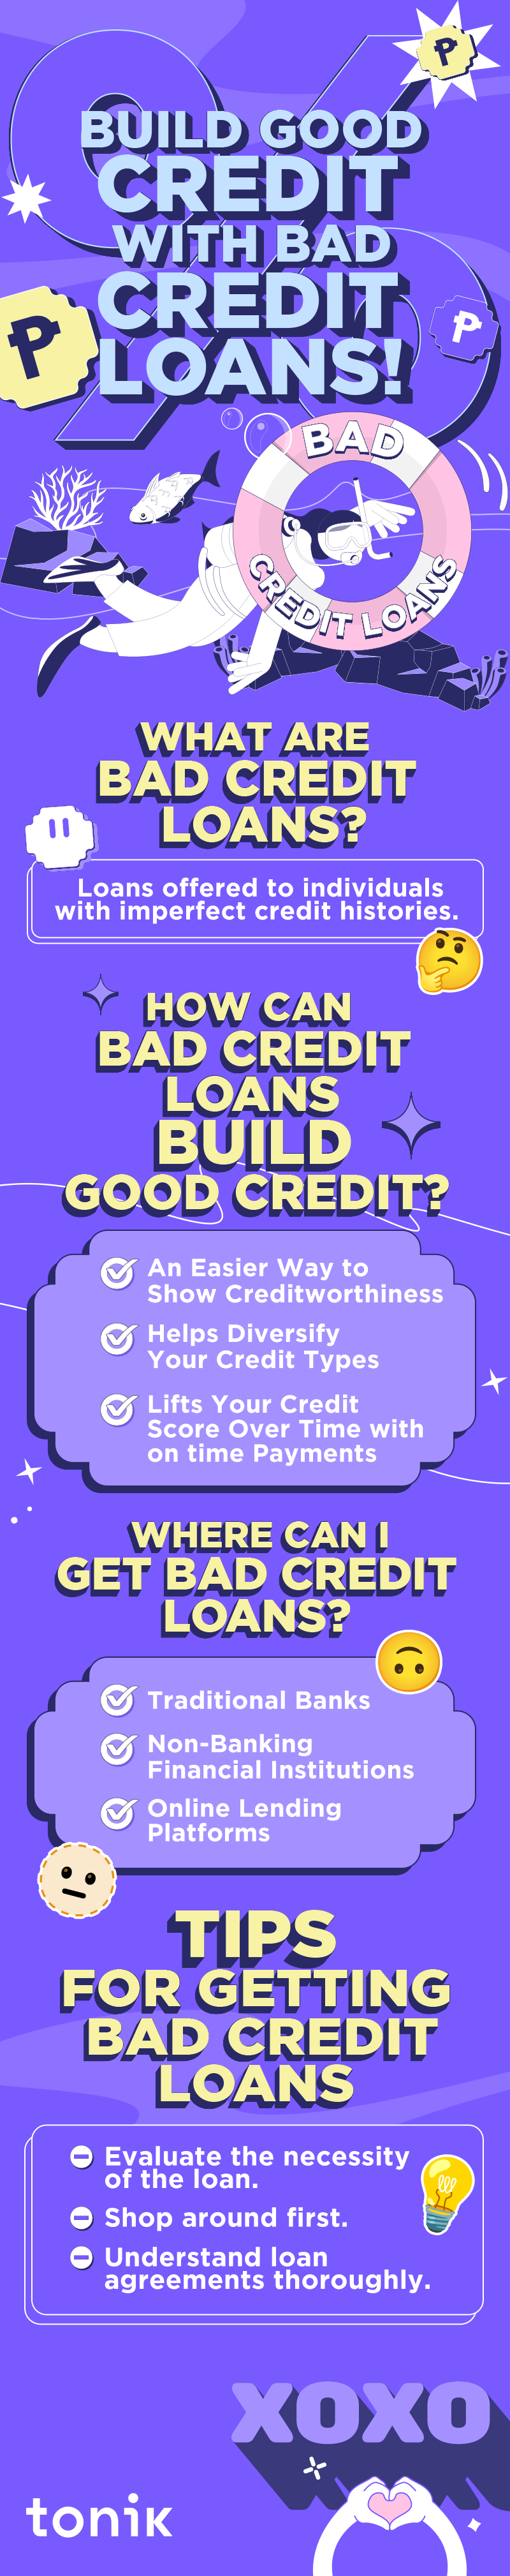 Infographic about Bad Credit Loans in the Philippines